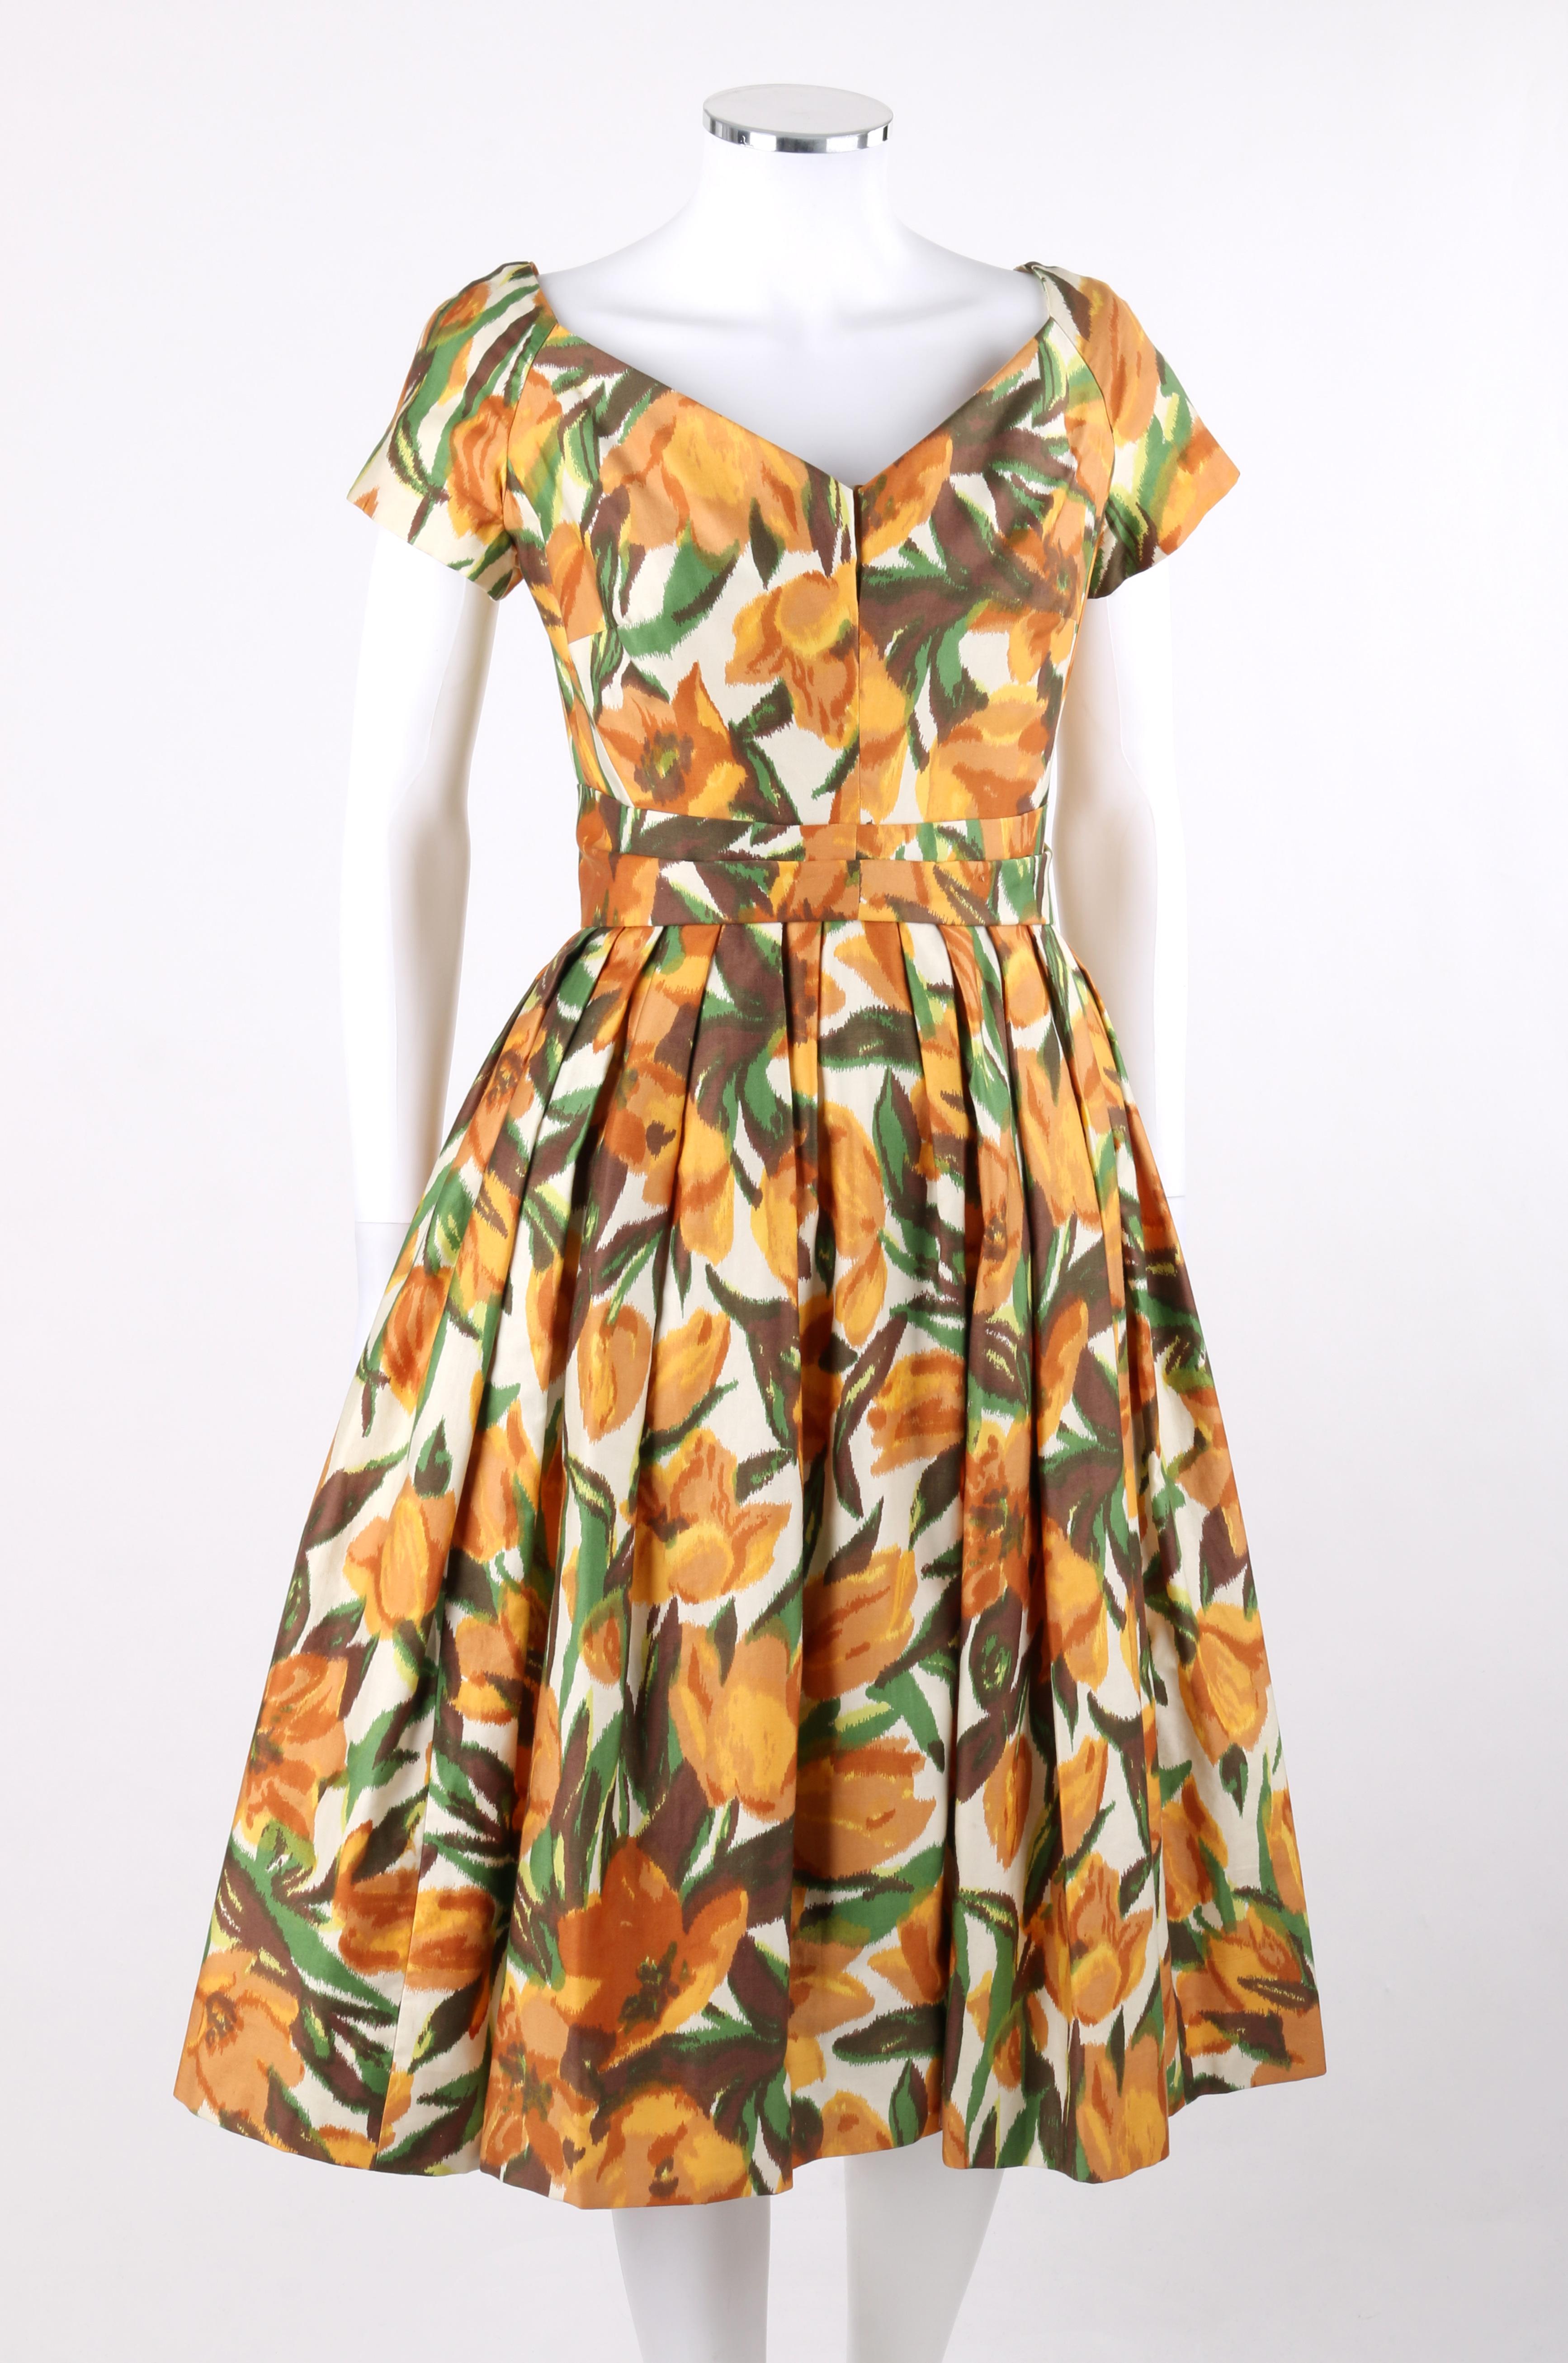 ADELE SIMPSON c.1950s Blooming Tulip Floral Sweetheart Neckline Party Day Dress
 
Circa: 1950’s
Label(s): Adele Simpson
Designer: Adele Simpson
Style: Day dress / knee-length dress
Color(s): Shades of yellow, green, brown, and white (exterior,